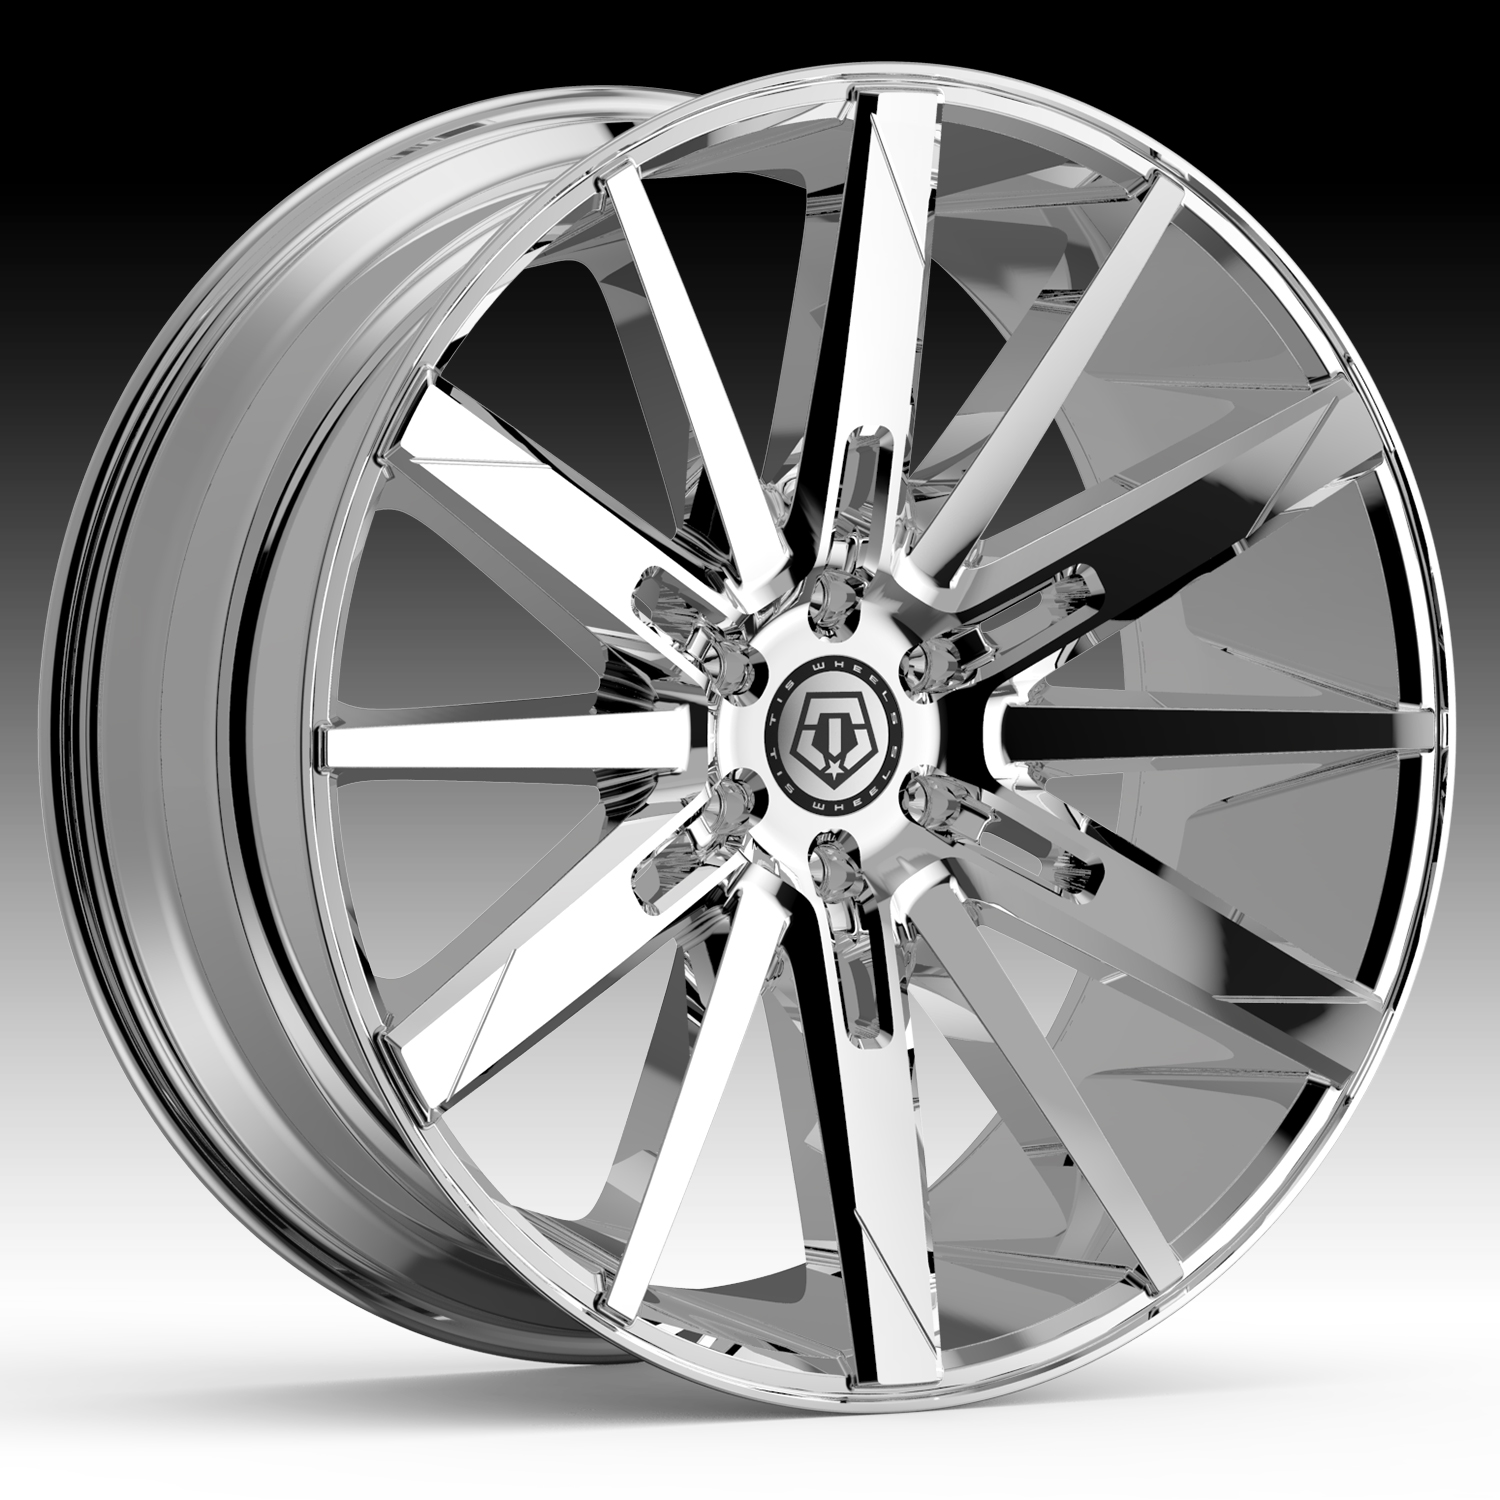 The TIS Wheels 545C chrome wheel is available in 22x10 and 24x10 sizes. 